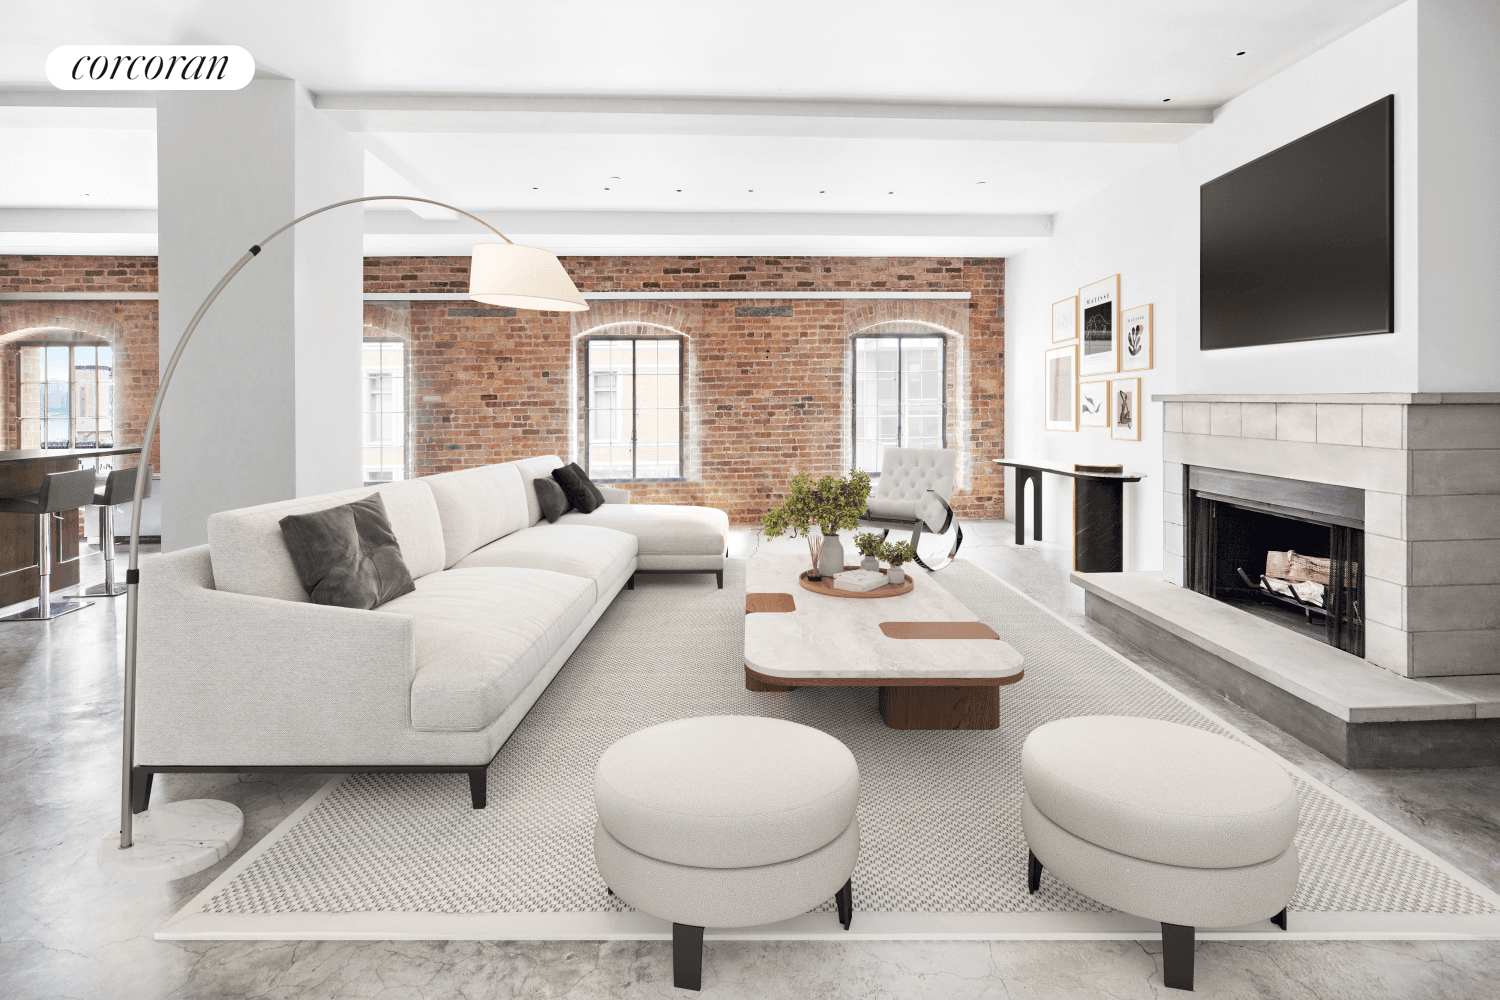 Perfectly located designer pre war triplex loft situated in TriBeCa's coveted Sugar Warehouse building.